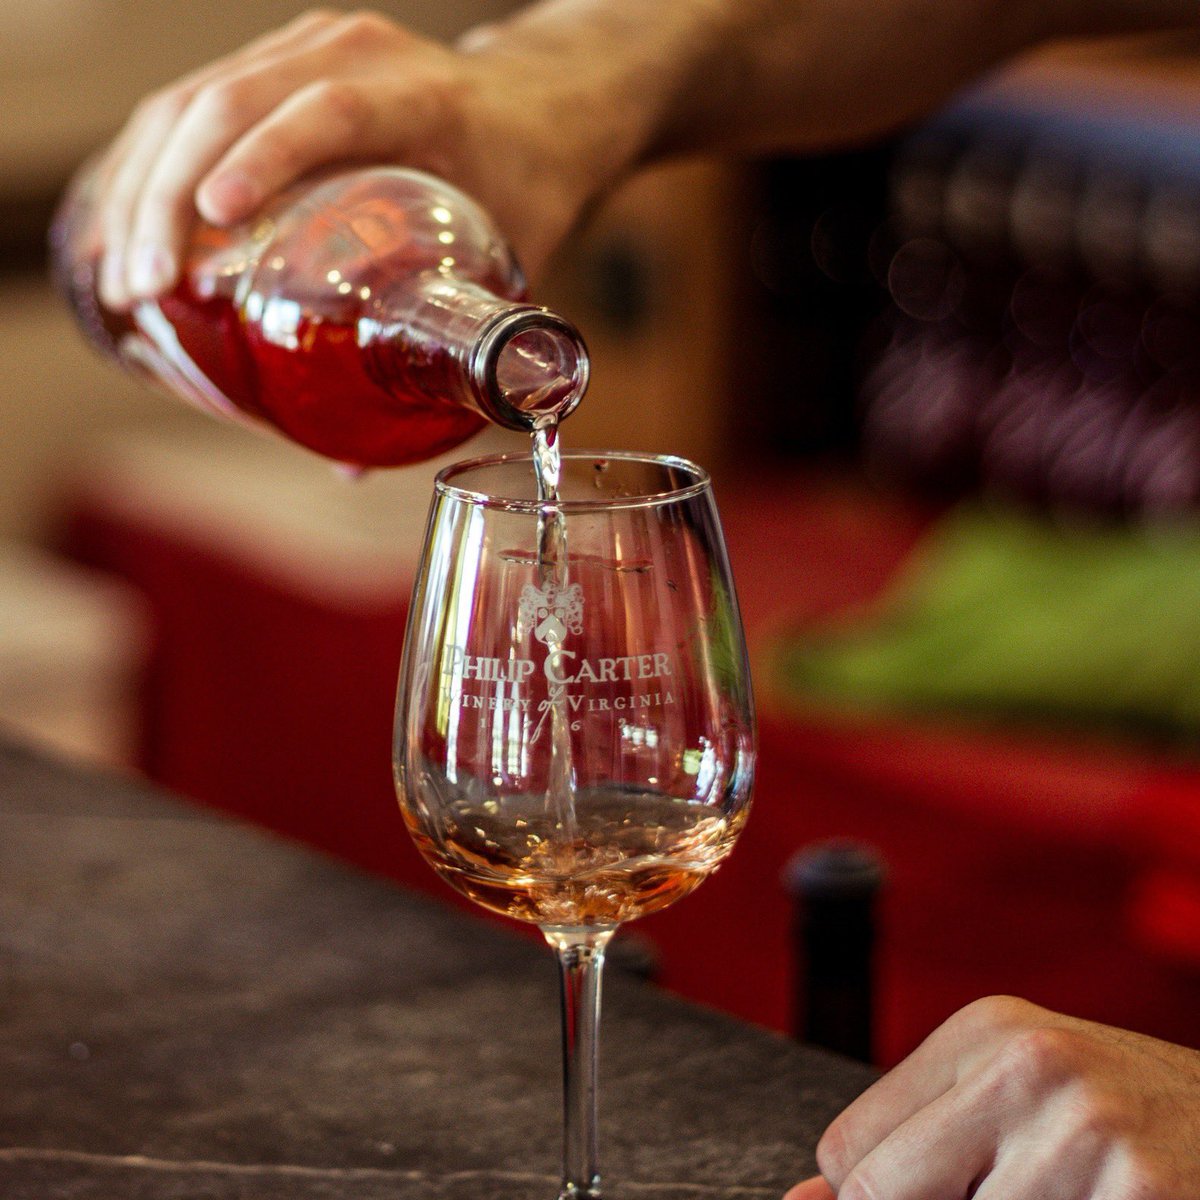 Do you want to become a wine tasting expert in just 60 seconds? Check out @PCWinery's latest blog post from their Assistant Wine Maker, Dale Clemence, to understand the process of evaluating wine in just one minute! 

pcwinery.com/how-to-become-…

#FauquierWine